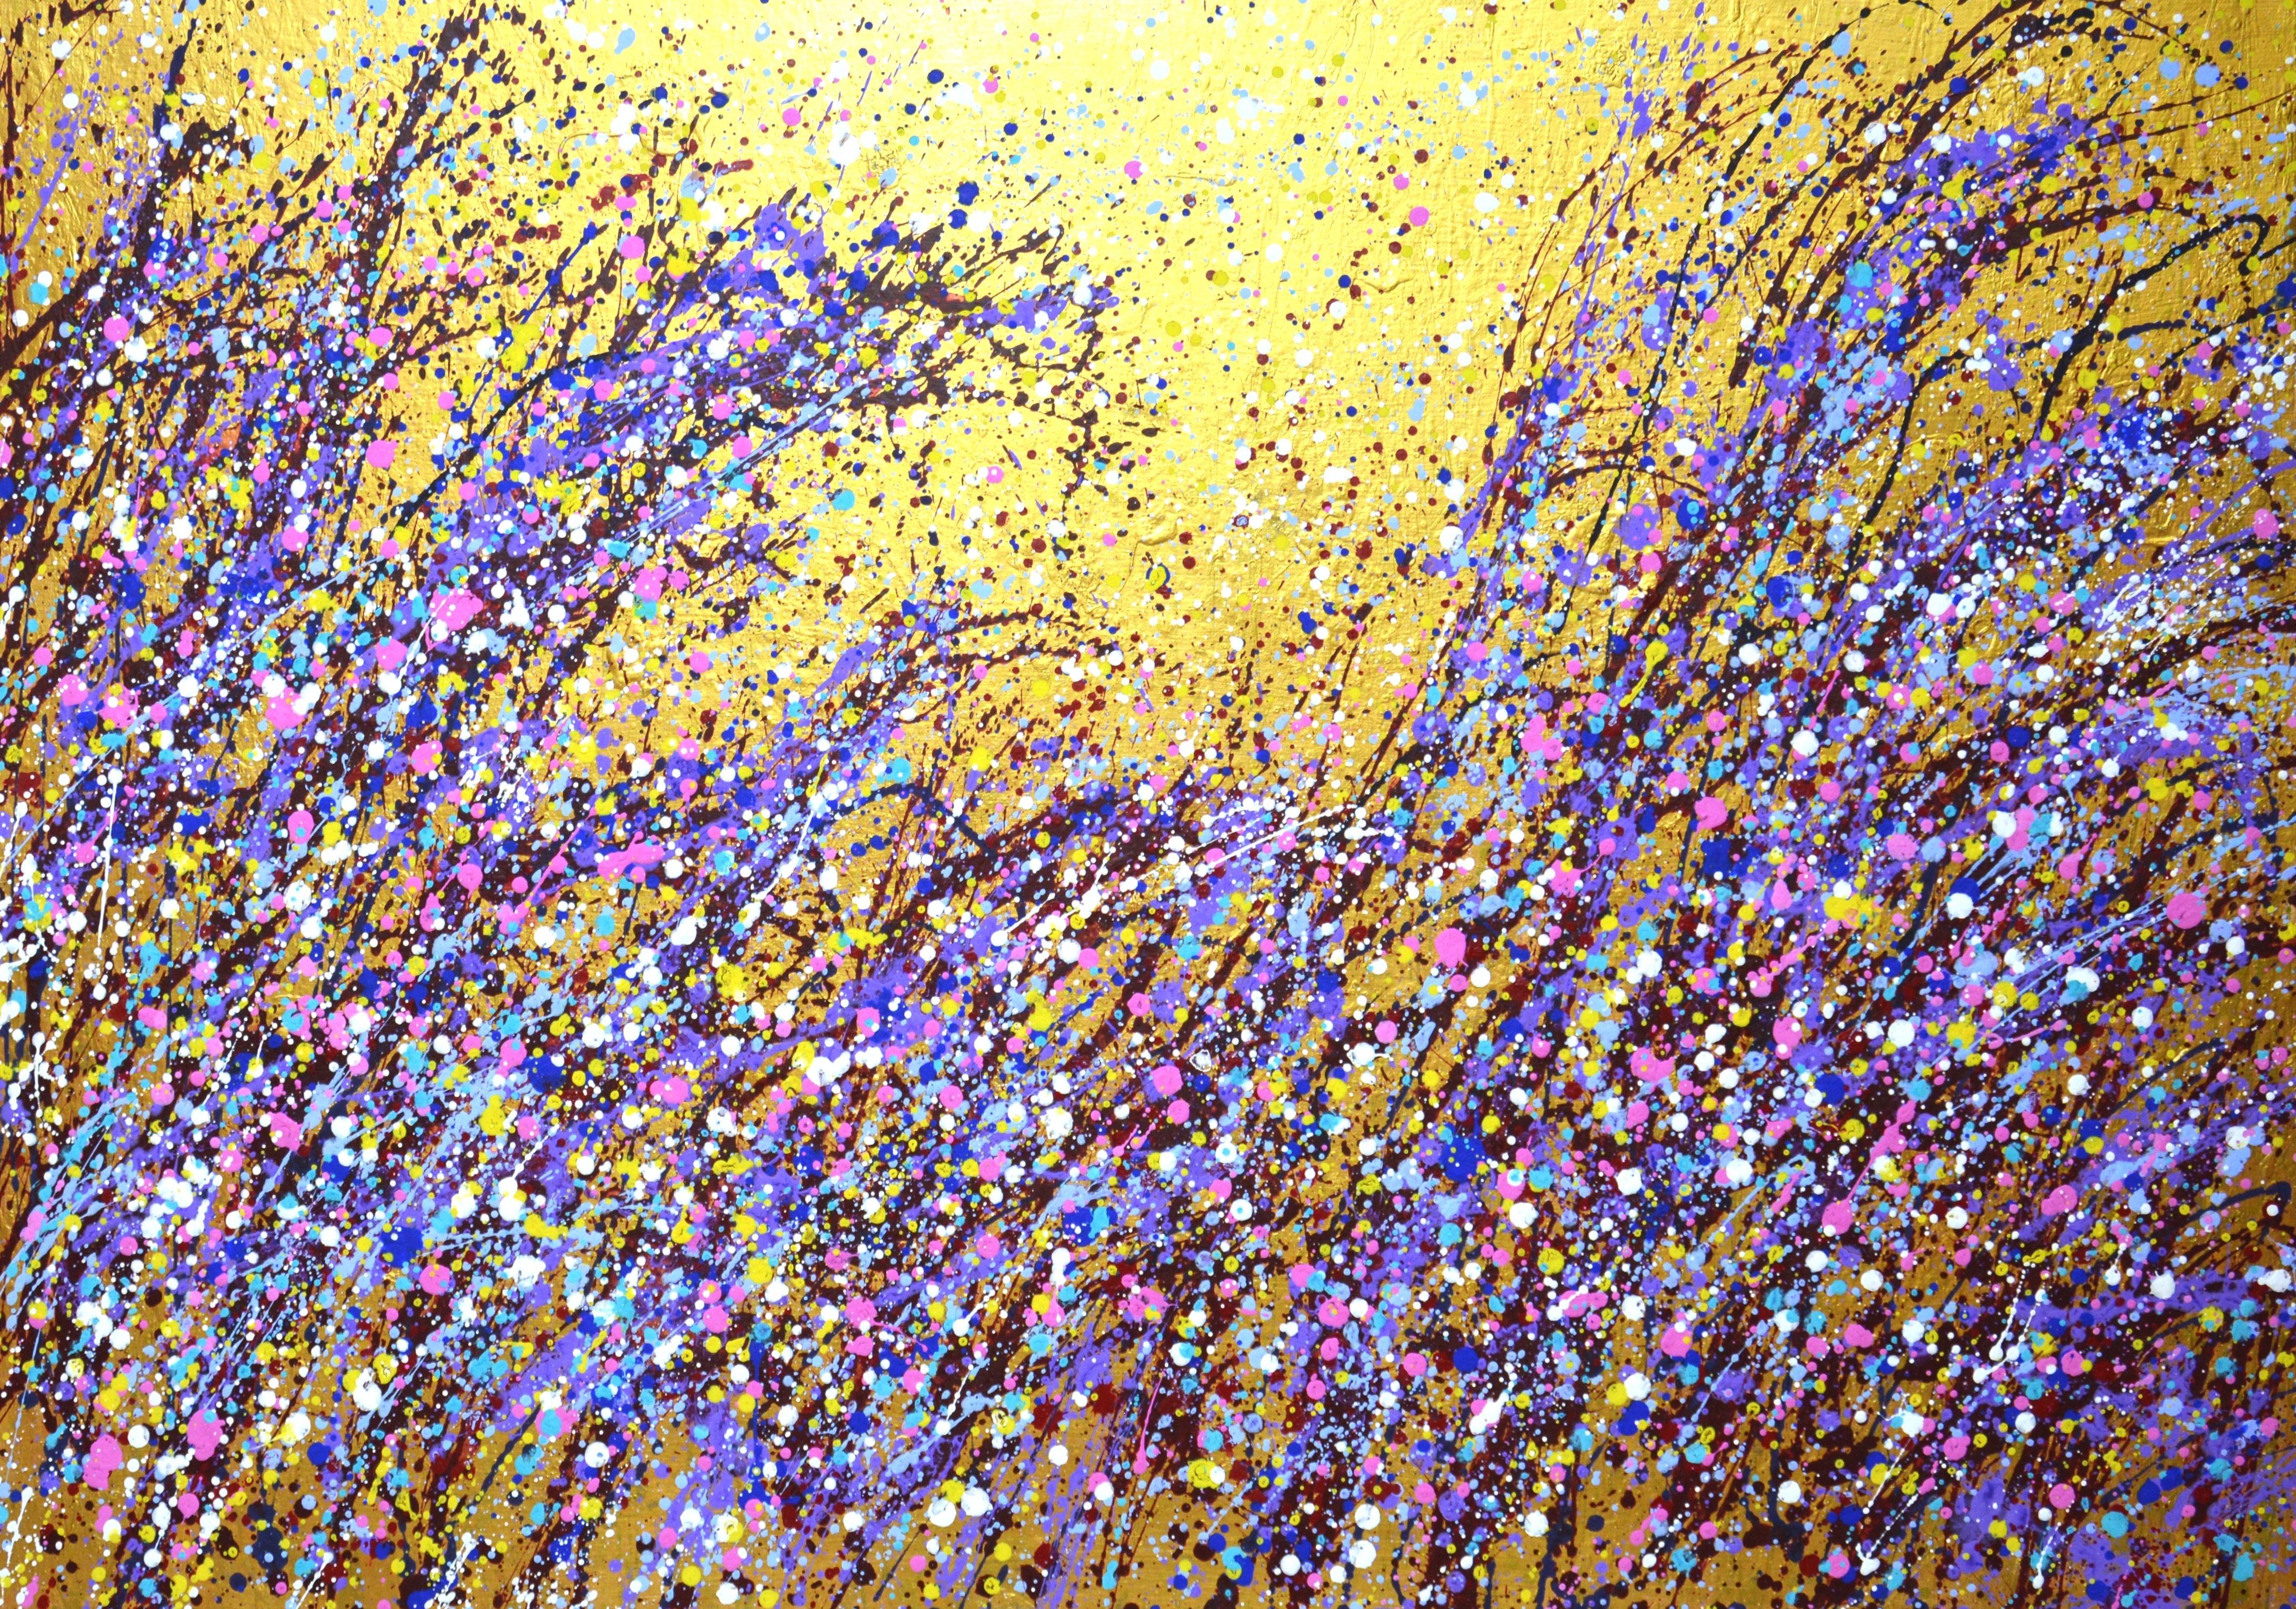 Magic field 6. Modern, expressive, abstract, fantasy landscape with a flower field, where all wishes come true. Abstract composition of purple, pink, blue, white drops on a golden background. A painting created by dripping and splashing paint that